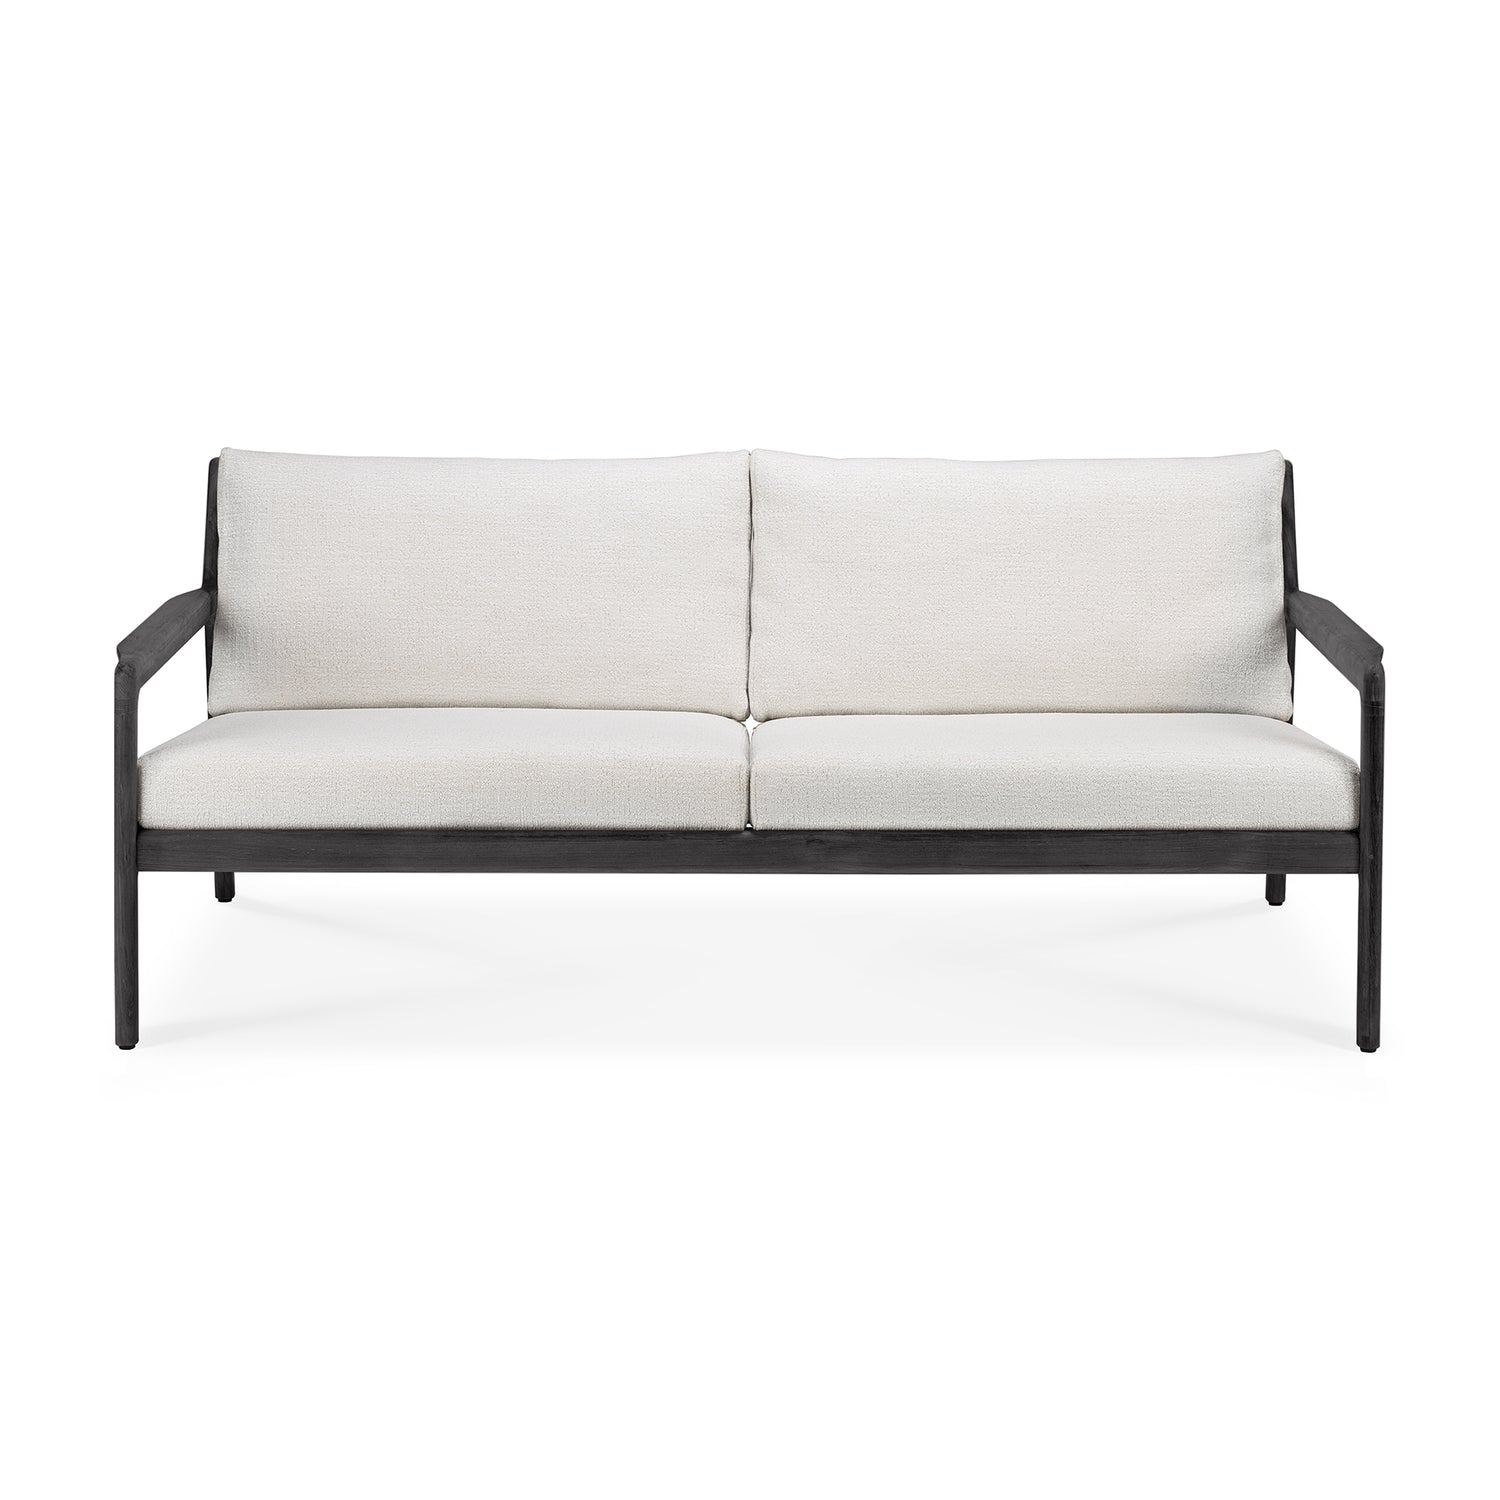 Jack Solid Black Teak Outdoor 2 Seater Sofa, Off White Fabric